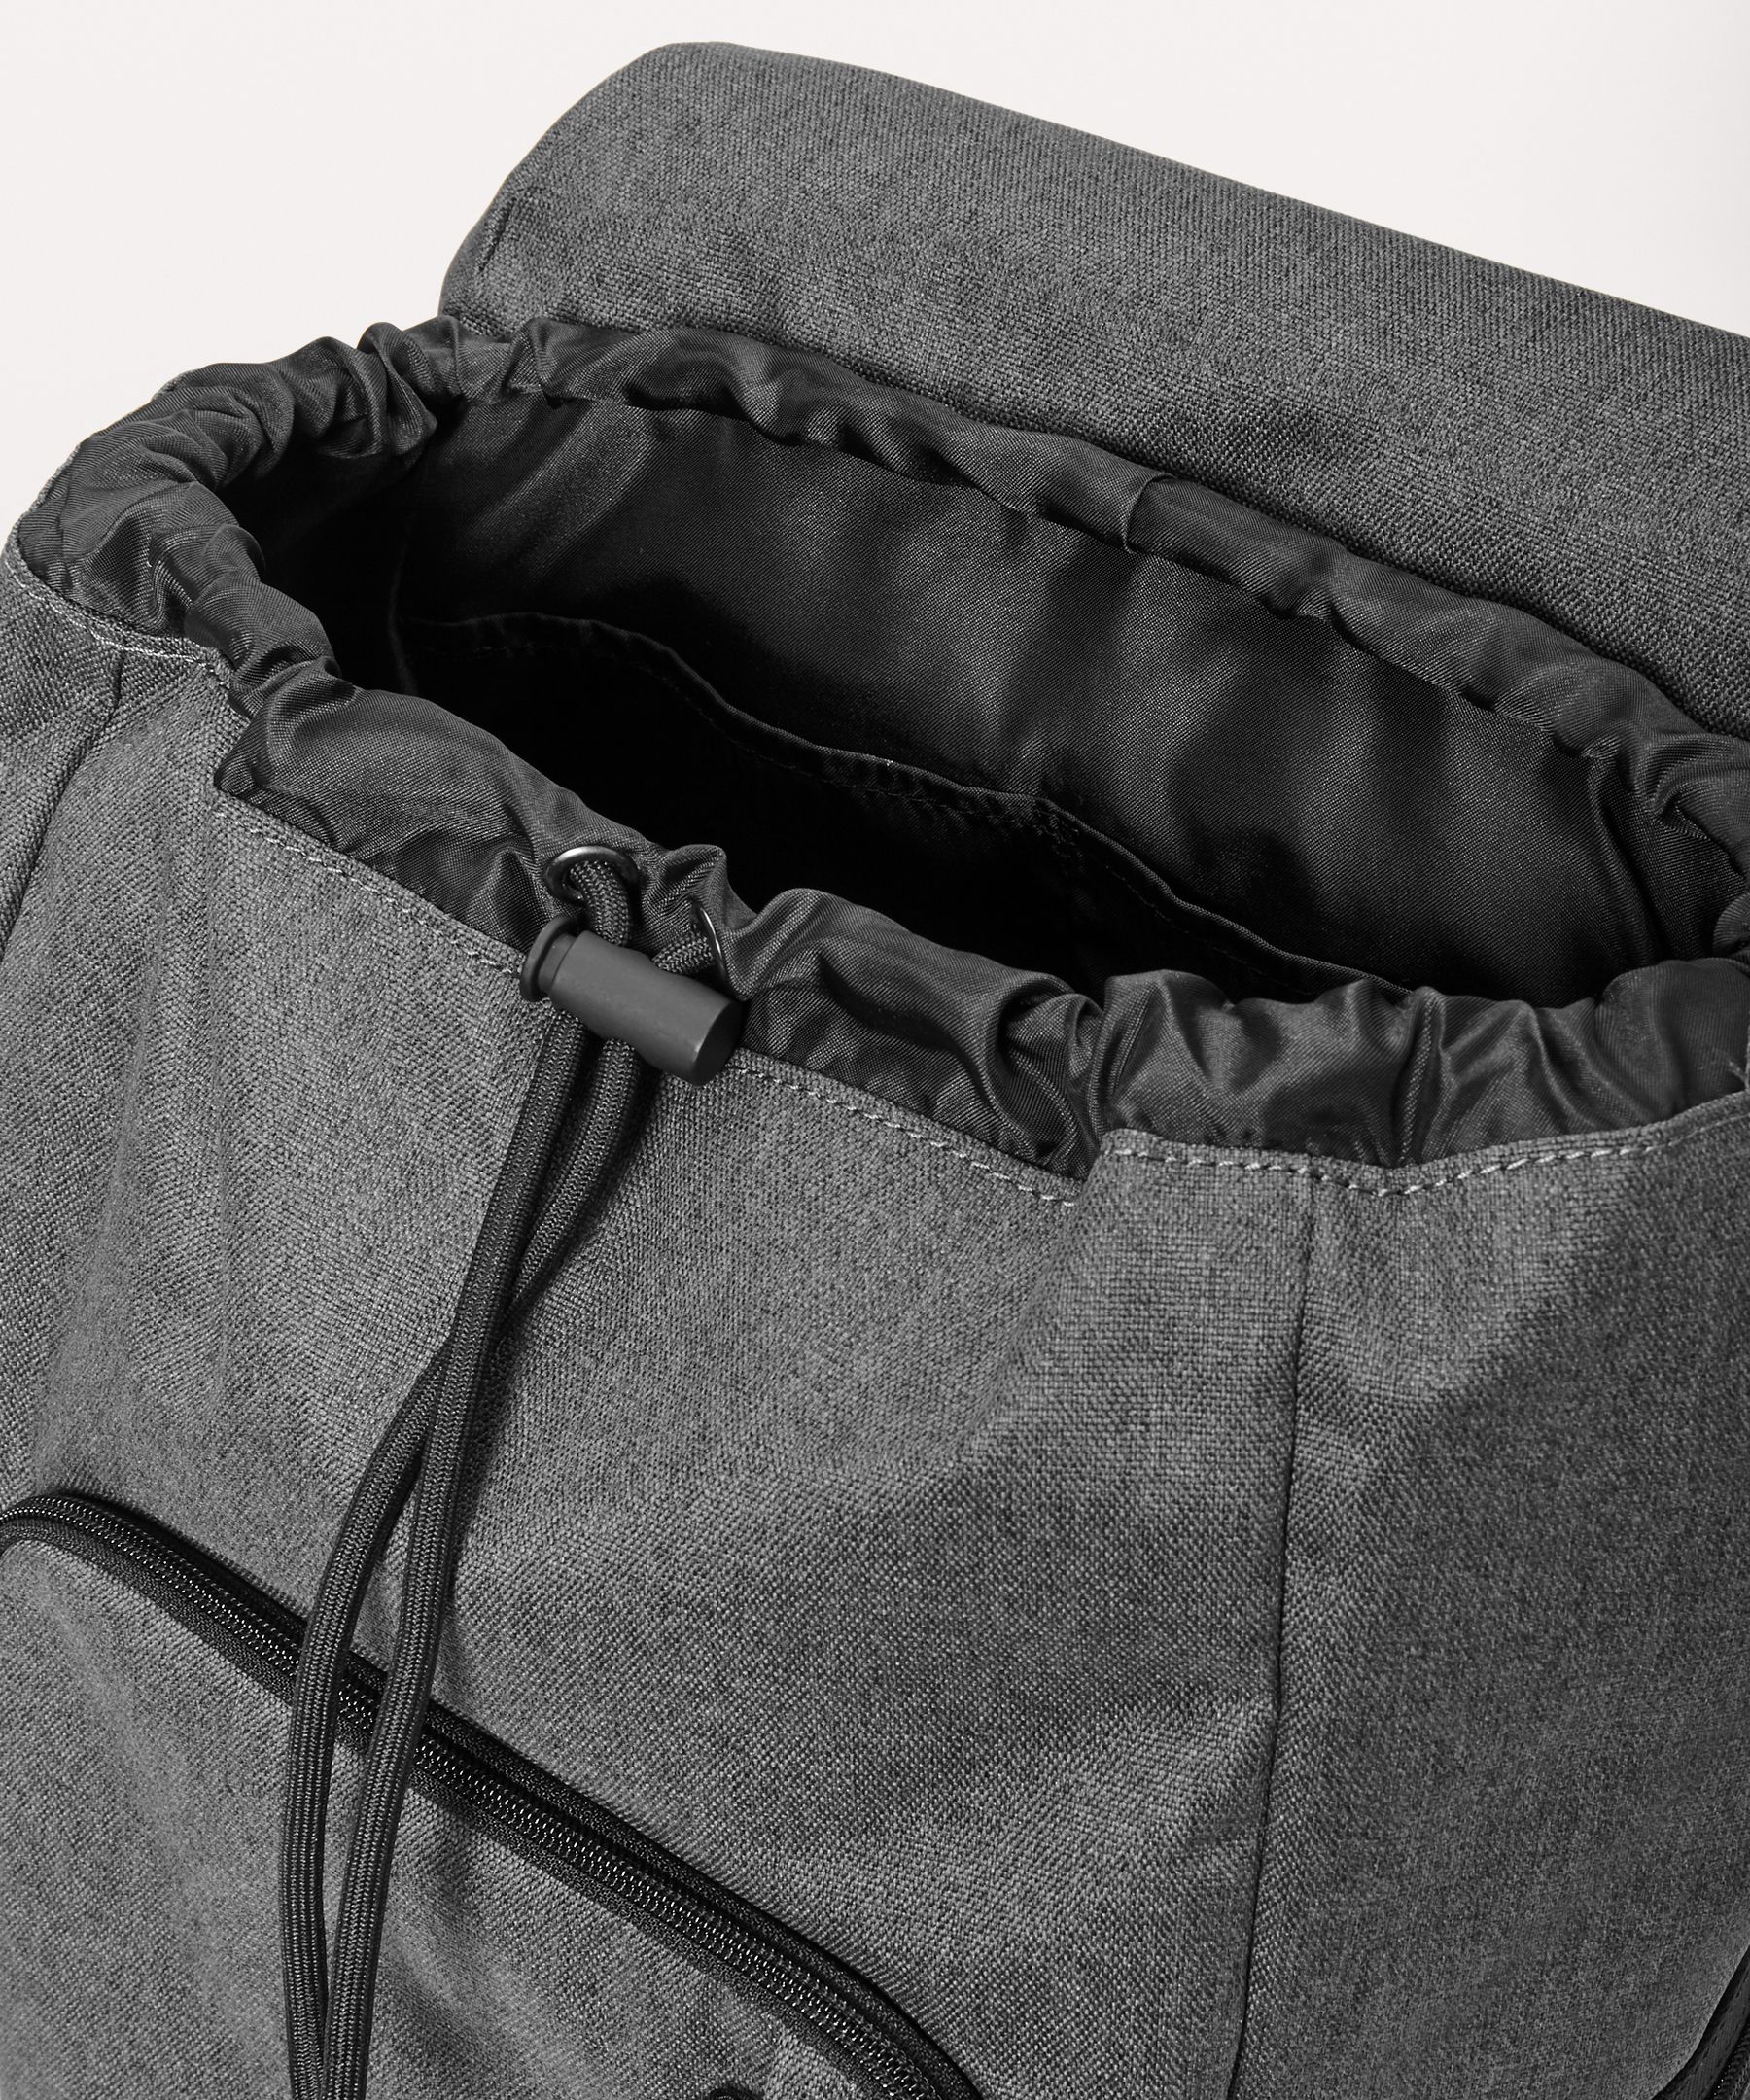 lululemon command the day commute bag